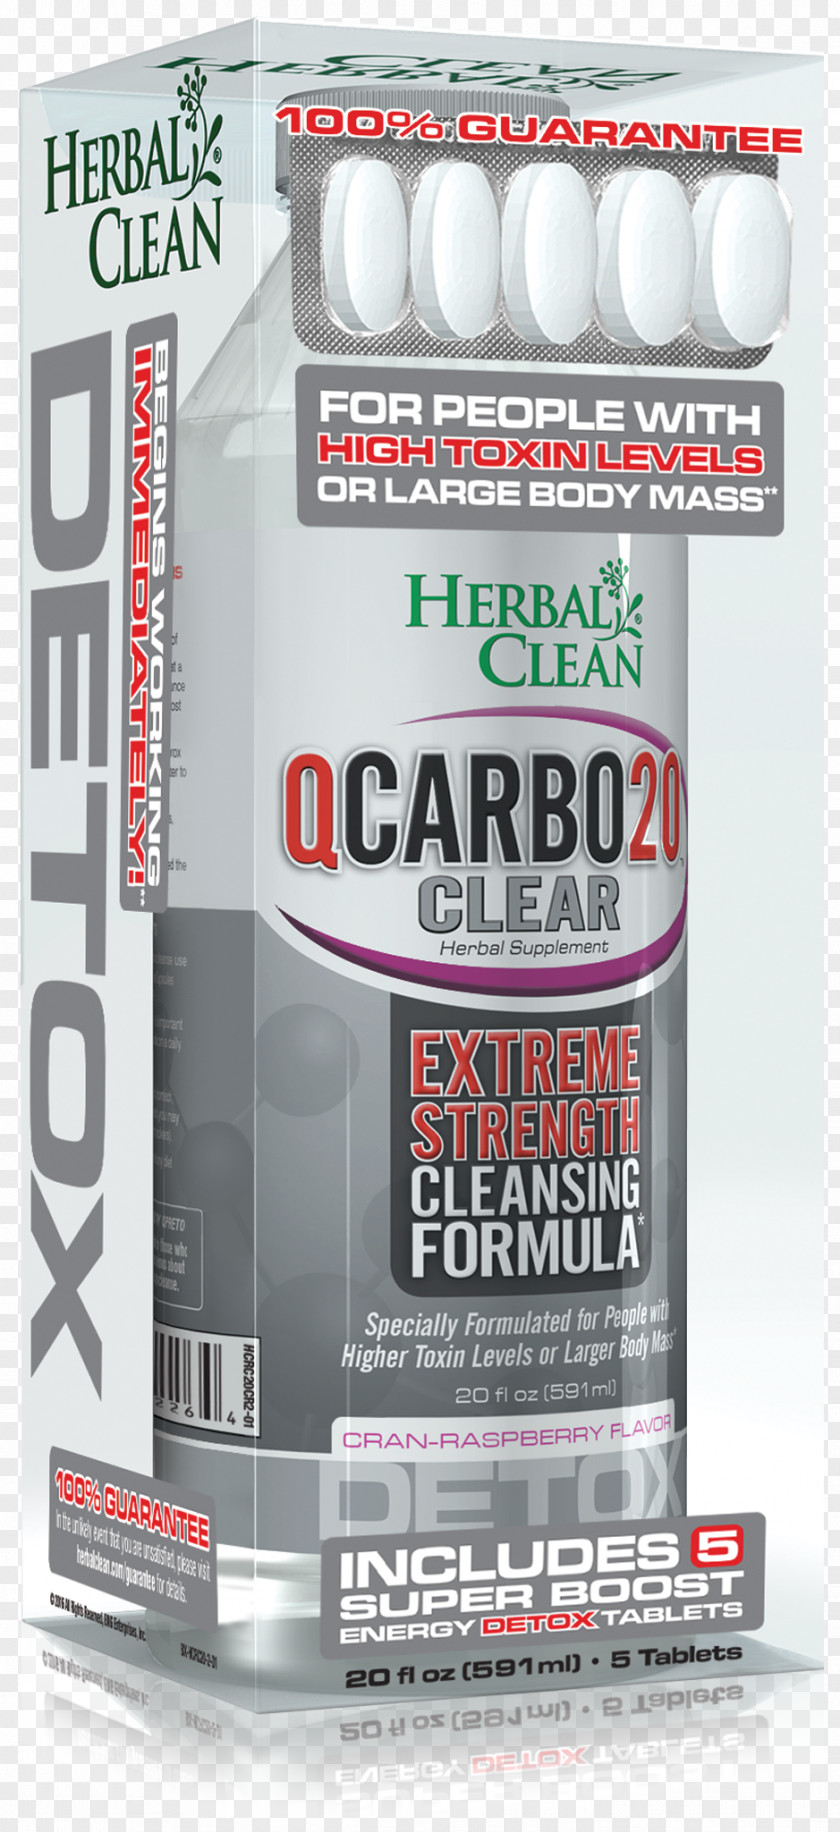 Herbal Cleanse HERBAL CLEAN DETOX Q Carbo Liquid Grape 16 OZ BNG Enterprises Clean QCarbo20 Clear Extreme Strength Cleansing Formula Lemon-Lime Flavor Detoxification Drink Cleanser PNG